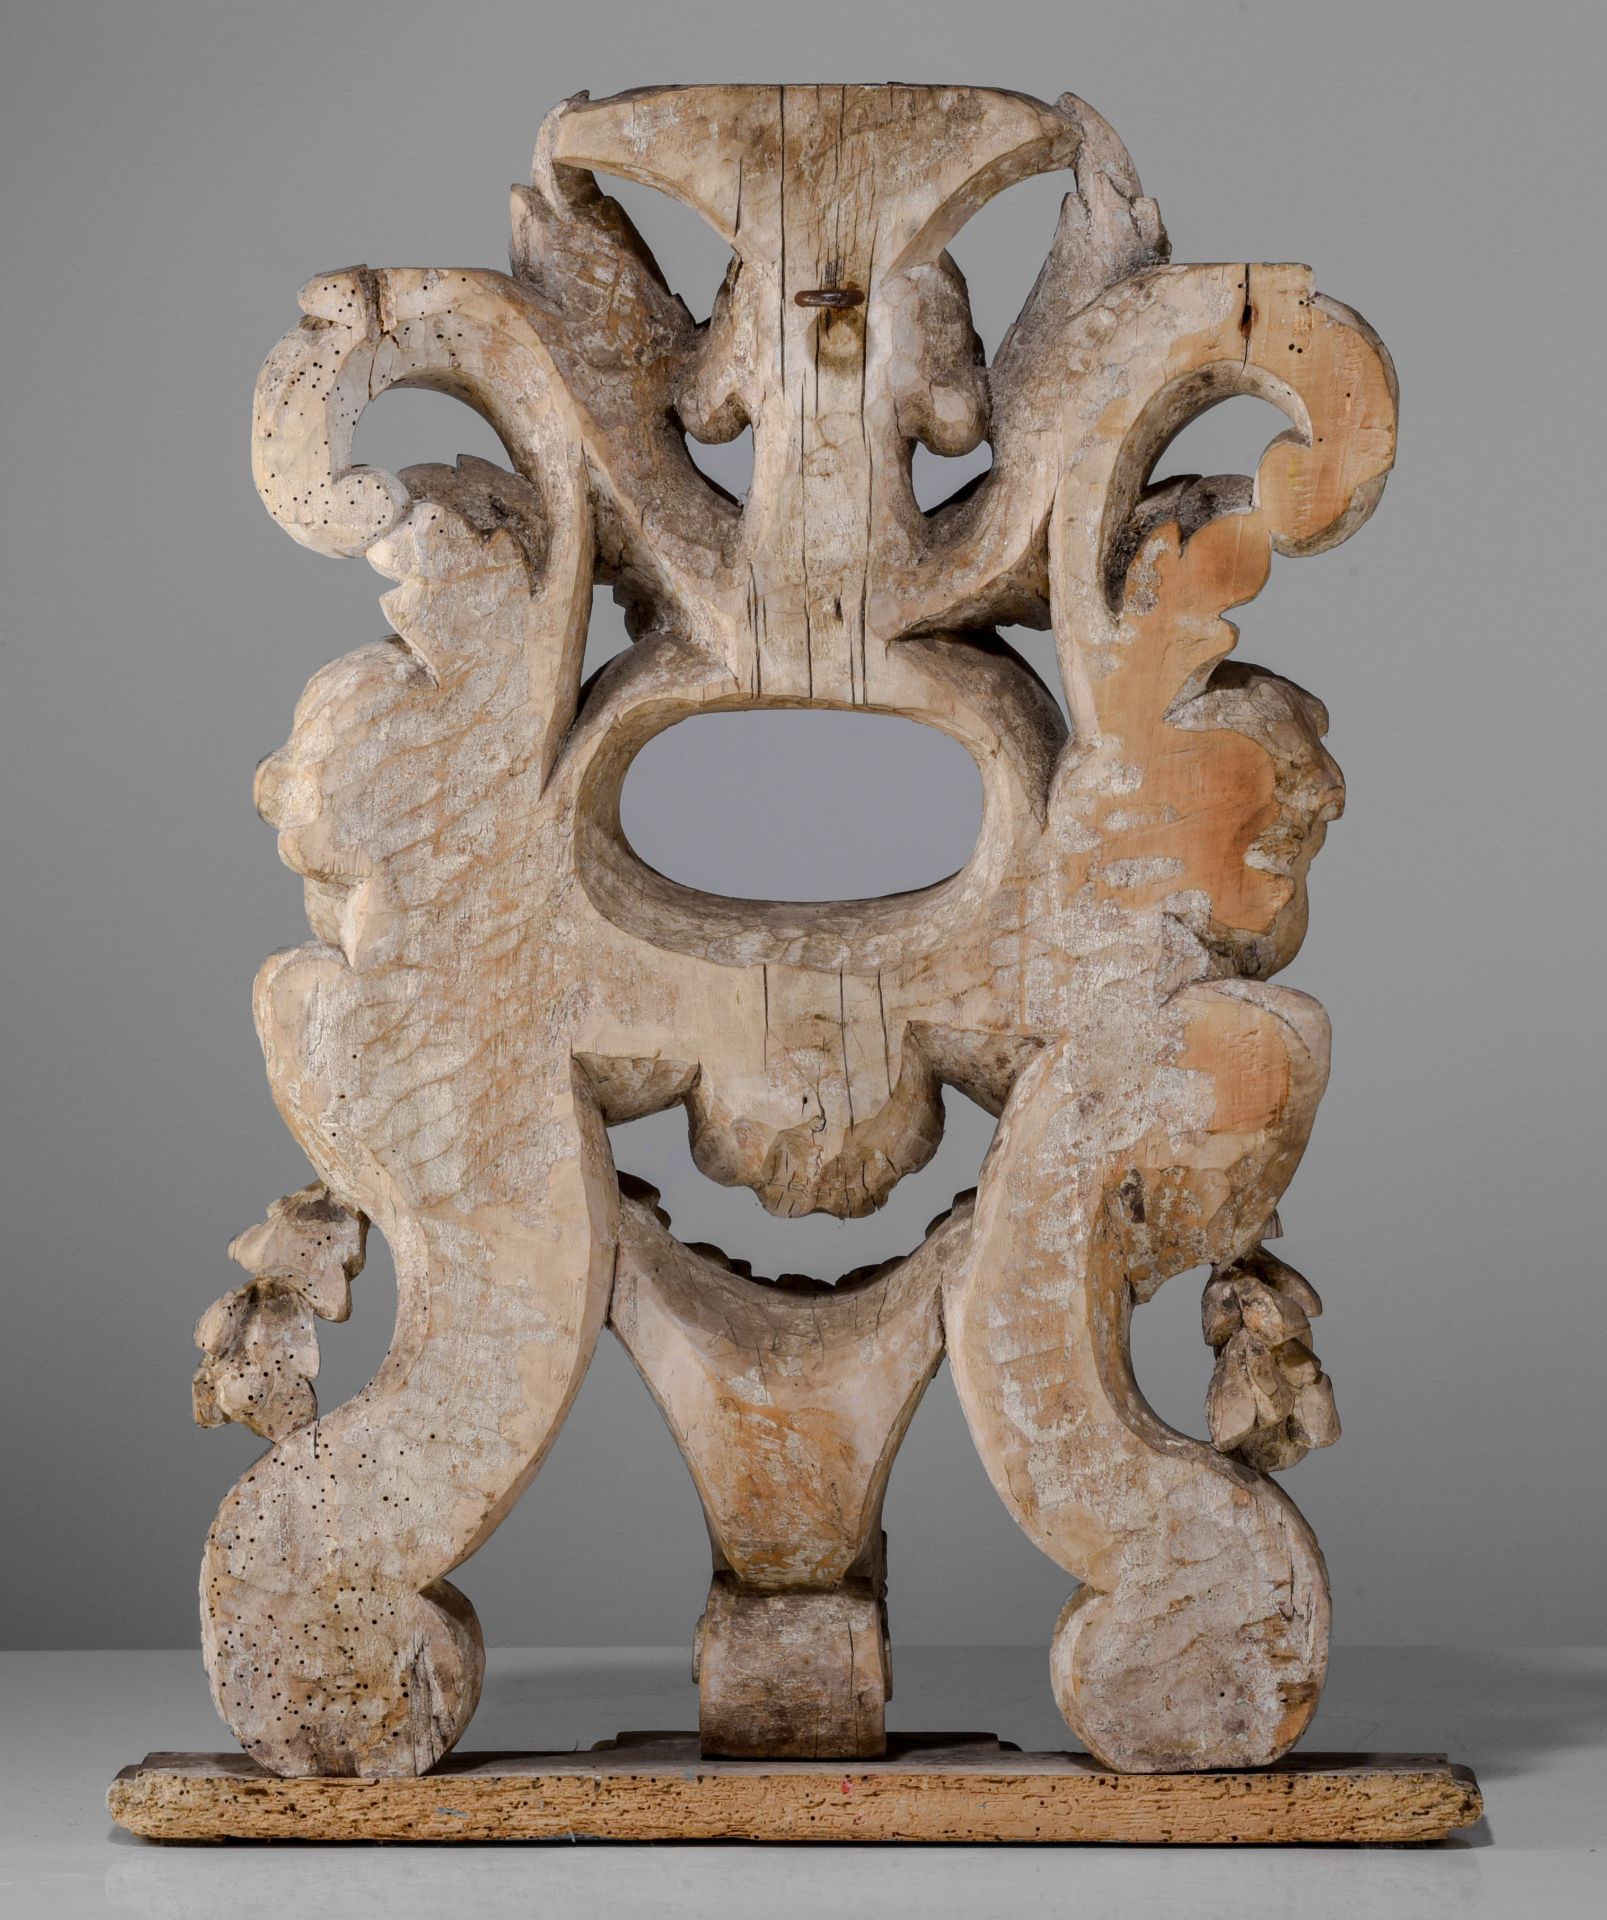 (BIDDING ONLY ON CARLOBONTE.BE) A Baroque richly carved limewood crucifix stand, H 56 cm - Image 5 of 10